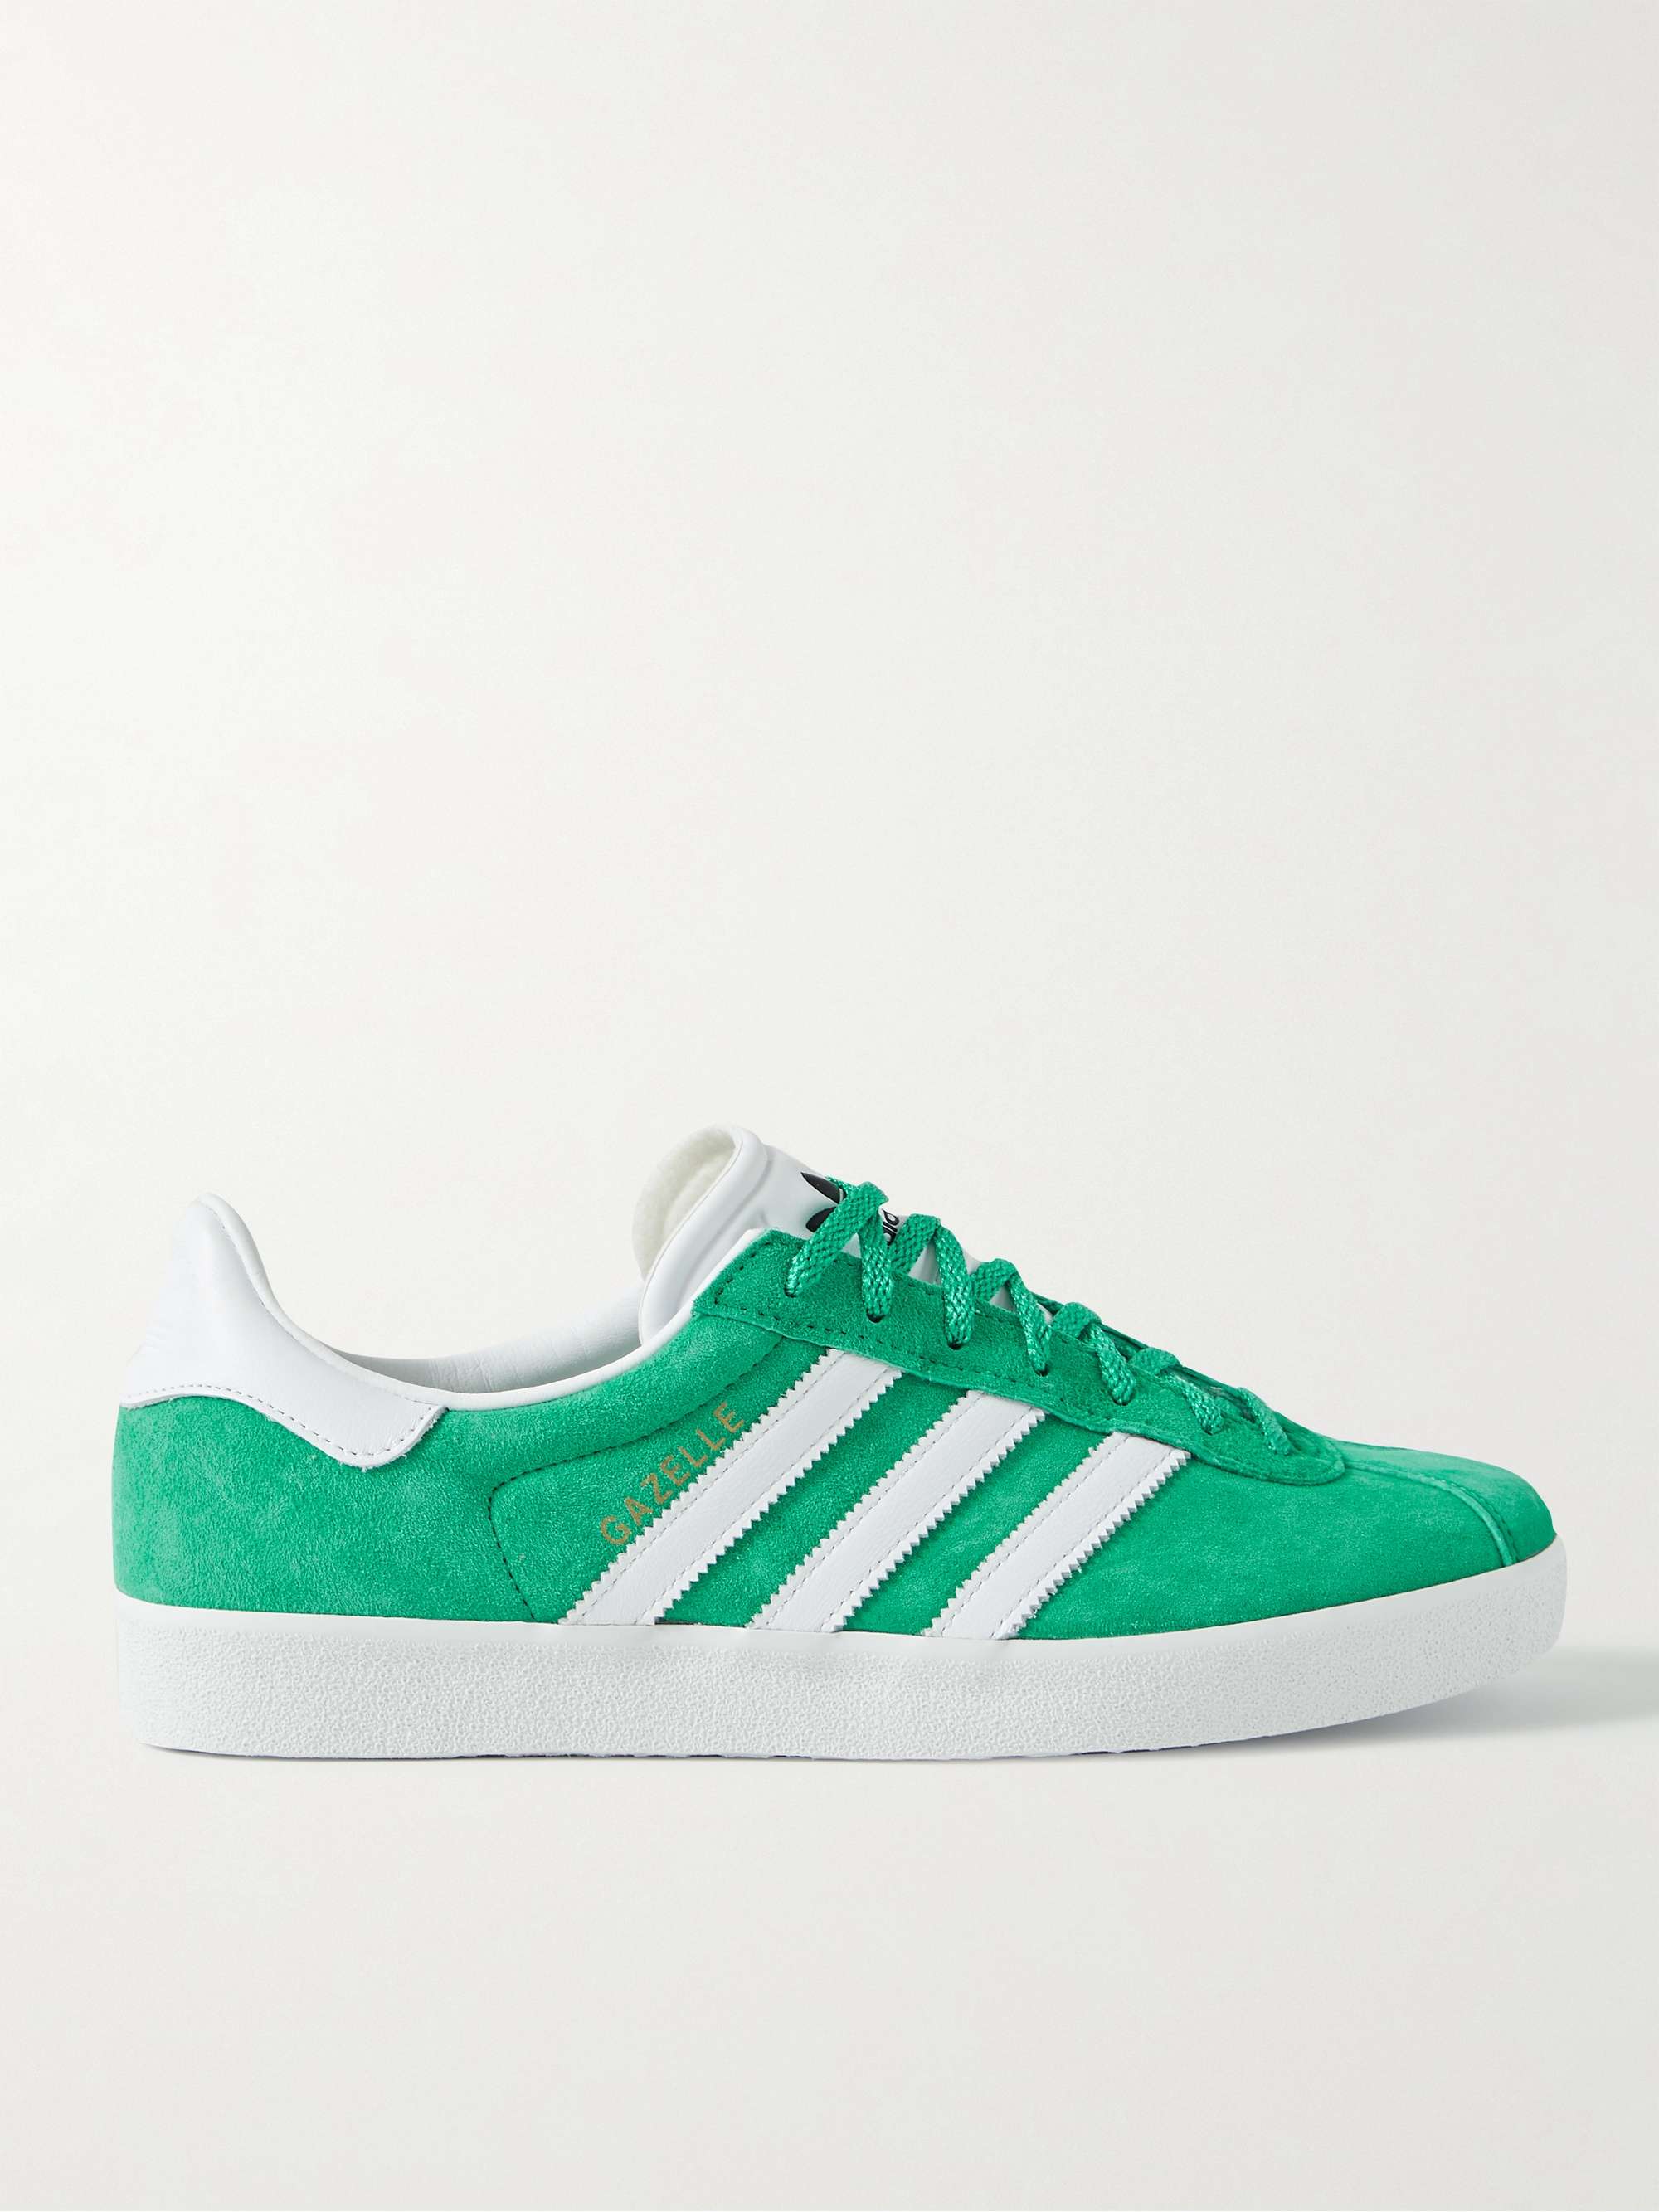 ADIDAS ORIGINALS Gazelle 85 Leather-Trimmed Suede Sneakers